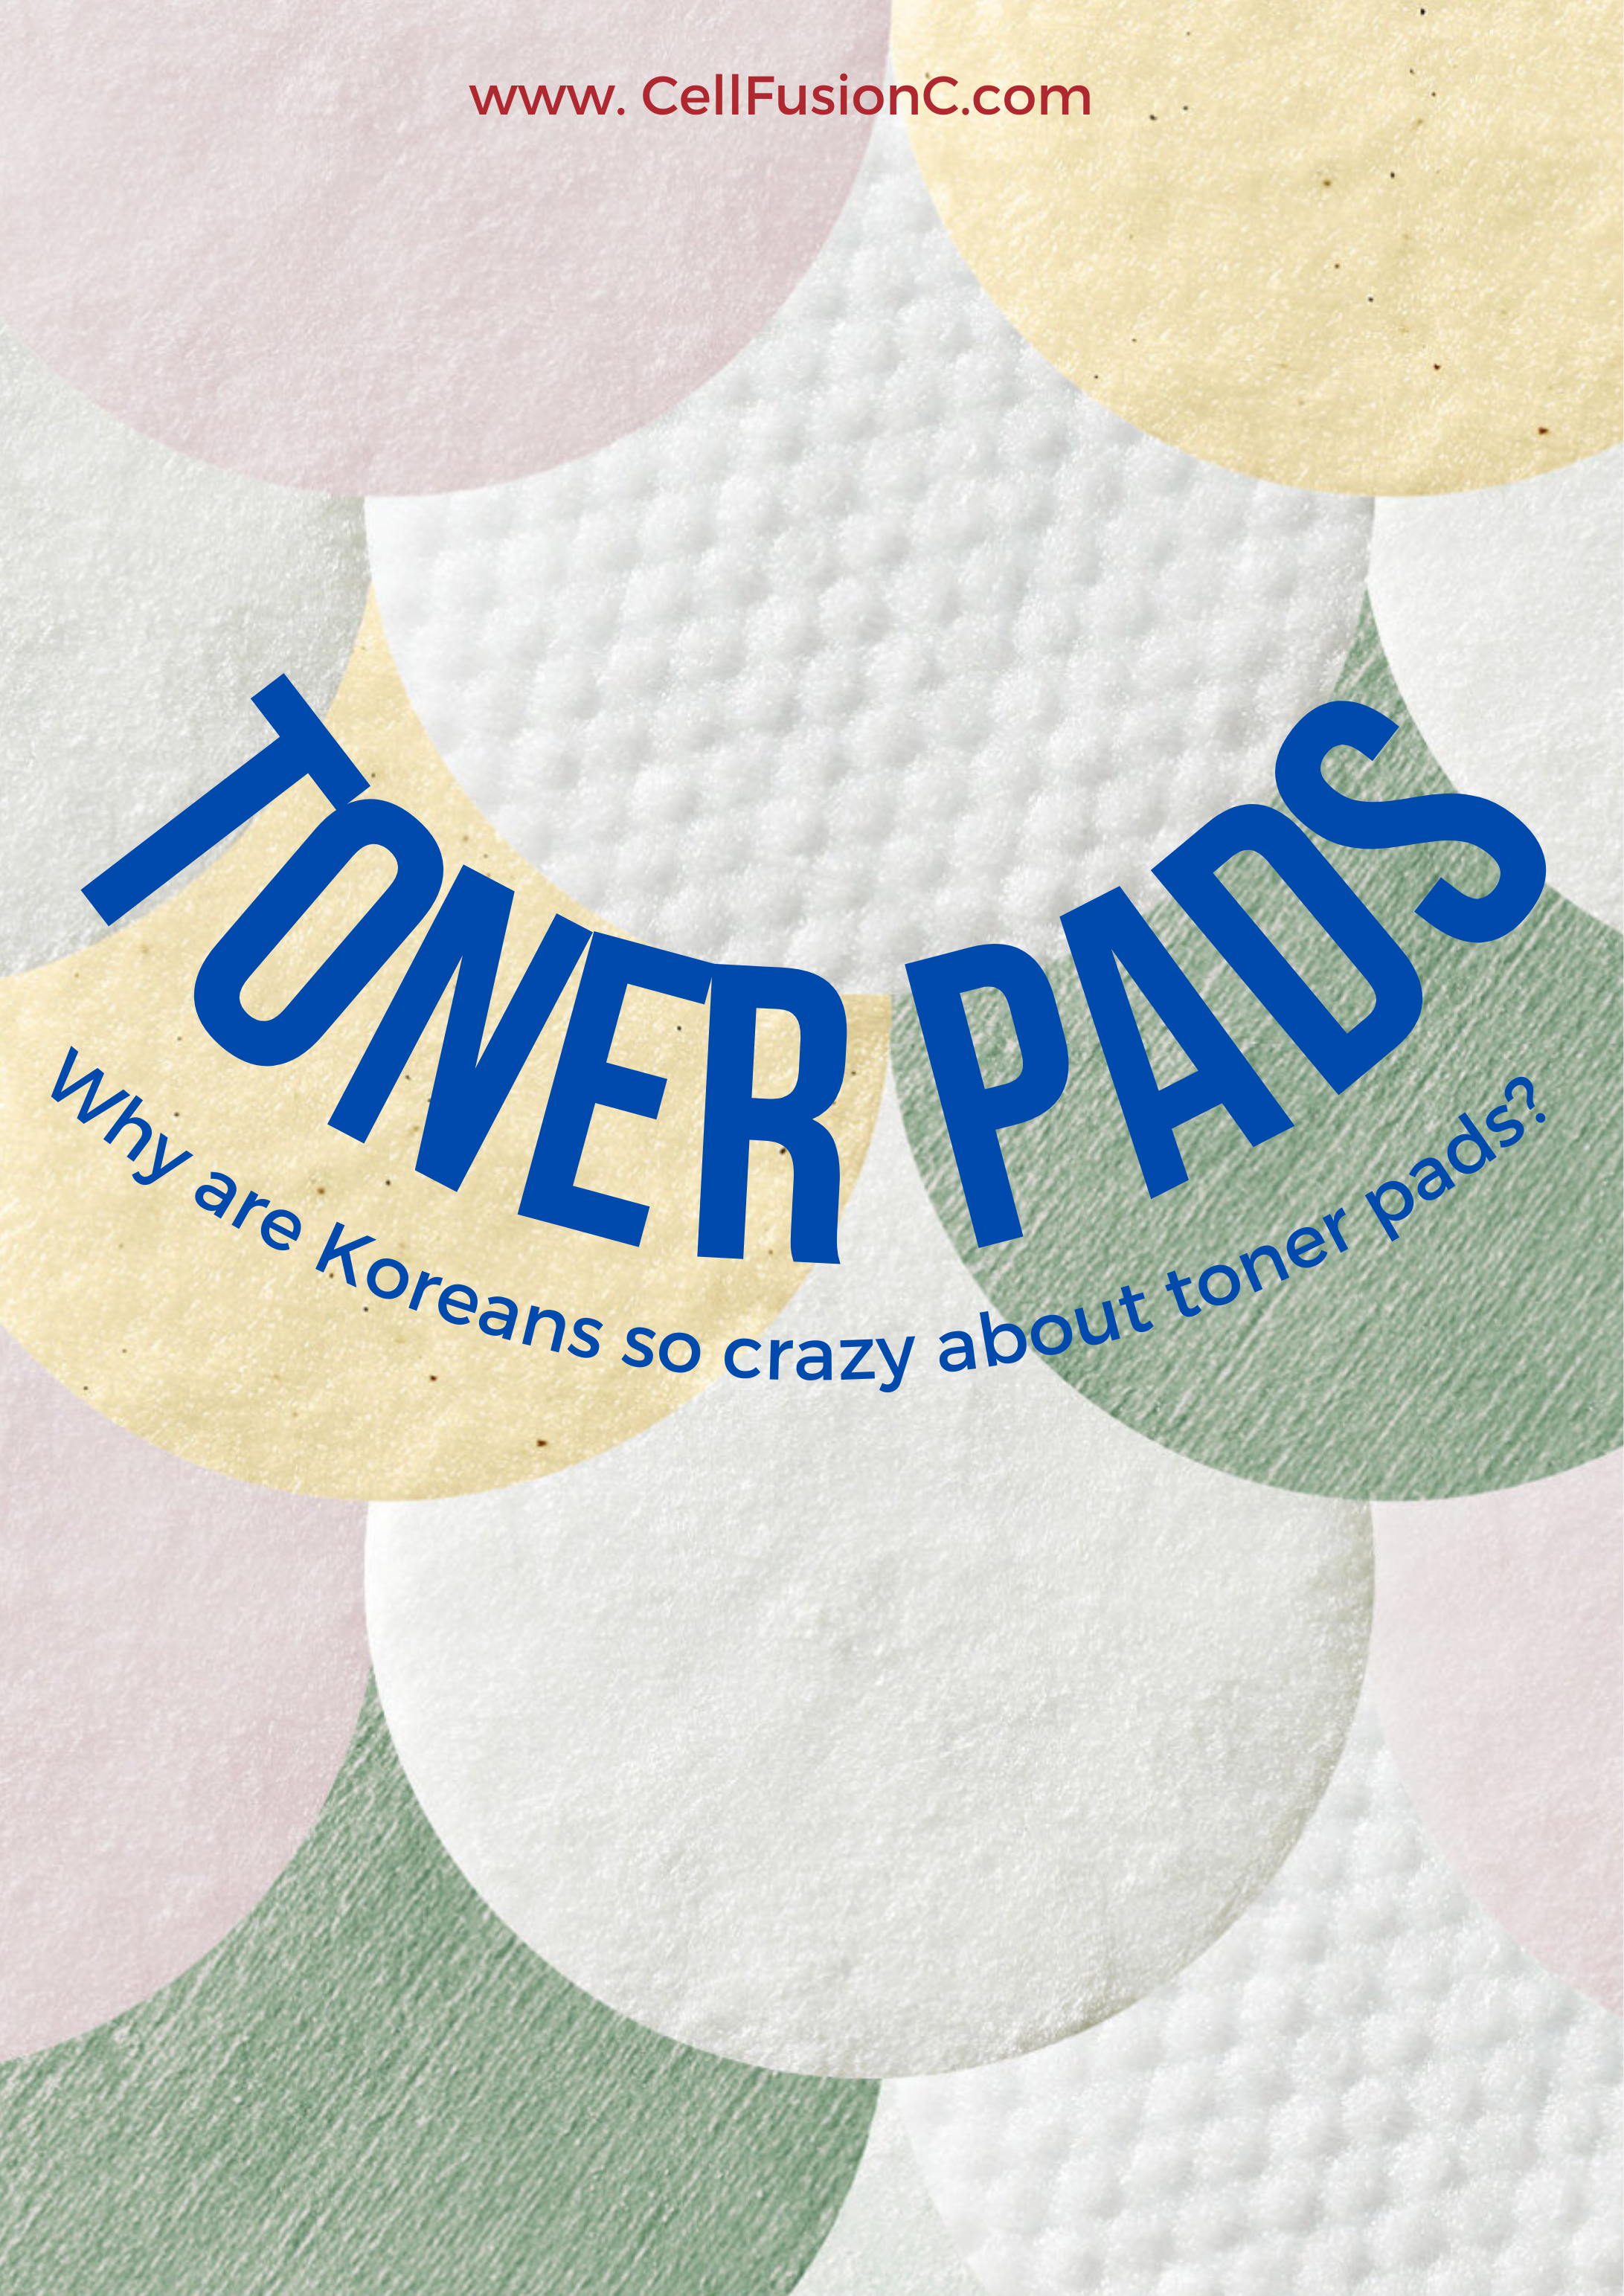 Hot items in Korean skincare : Why are Koreans so crazy about toner pads?